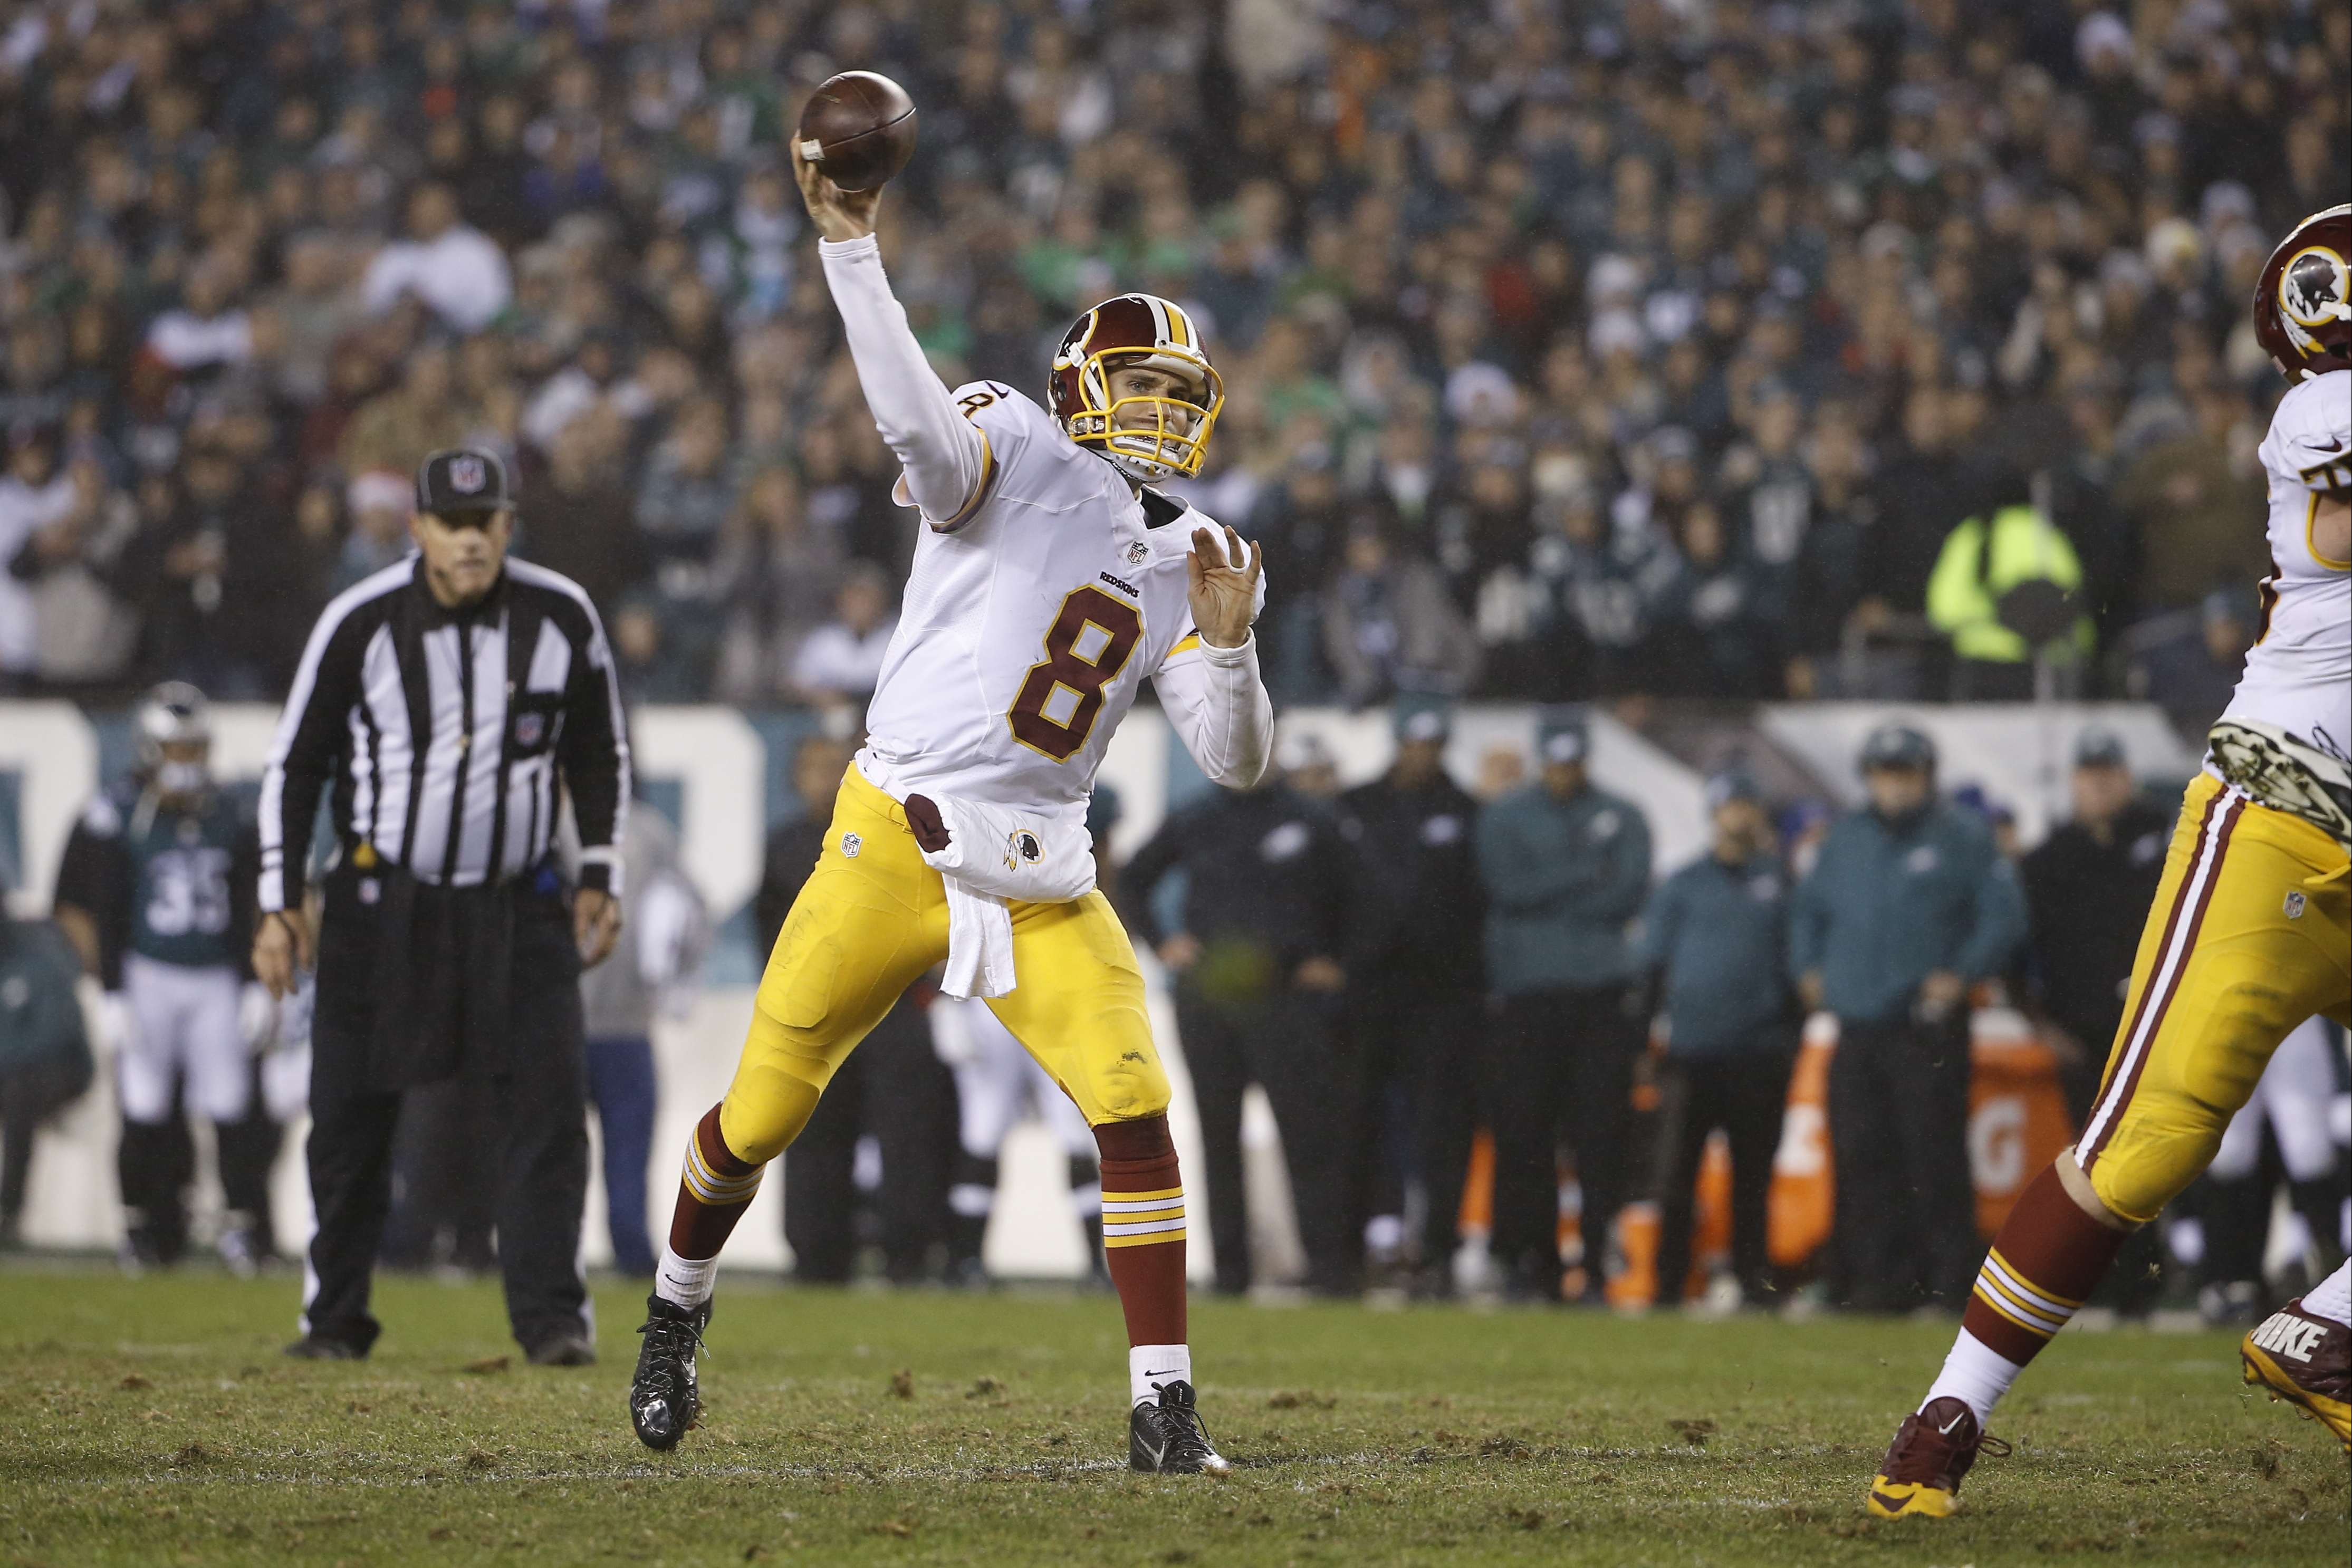 Redskins headed to the playoffs after win over the Eagles